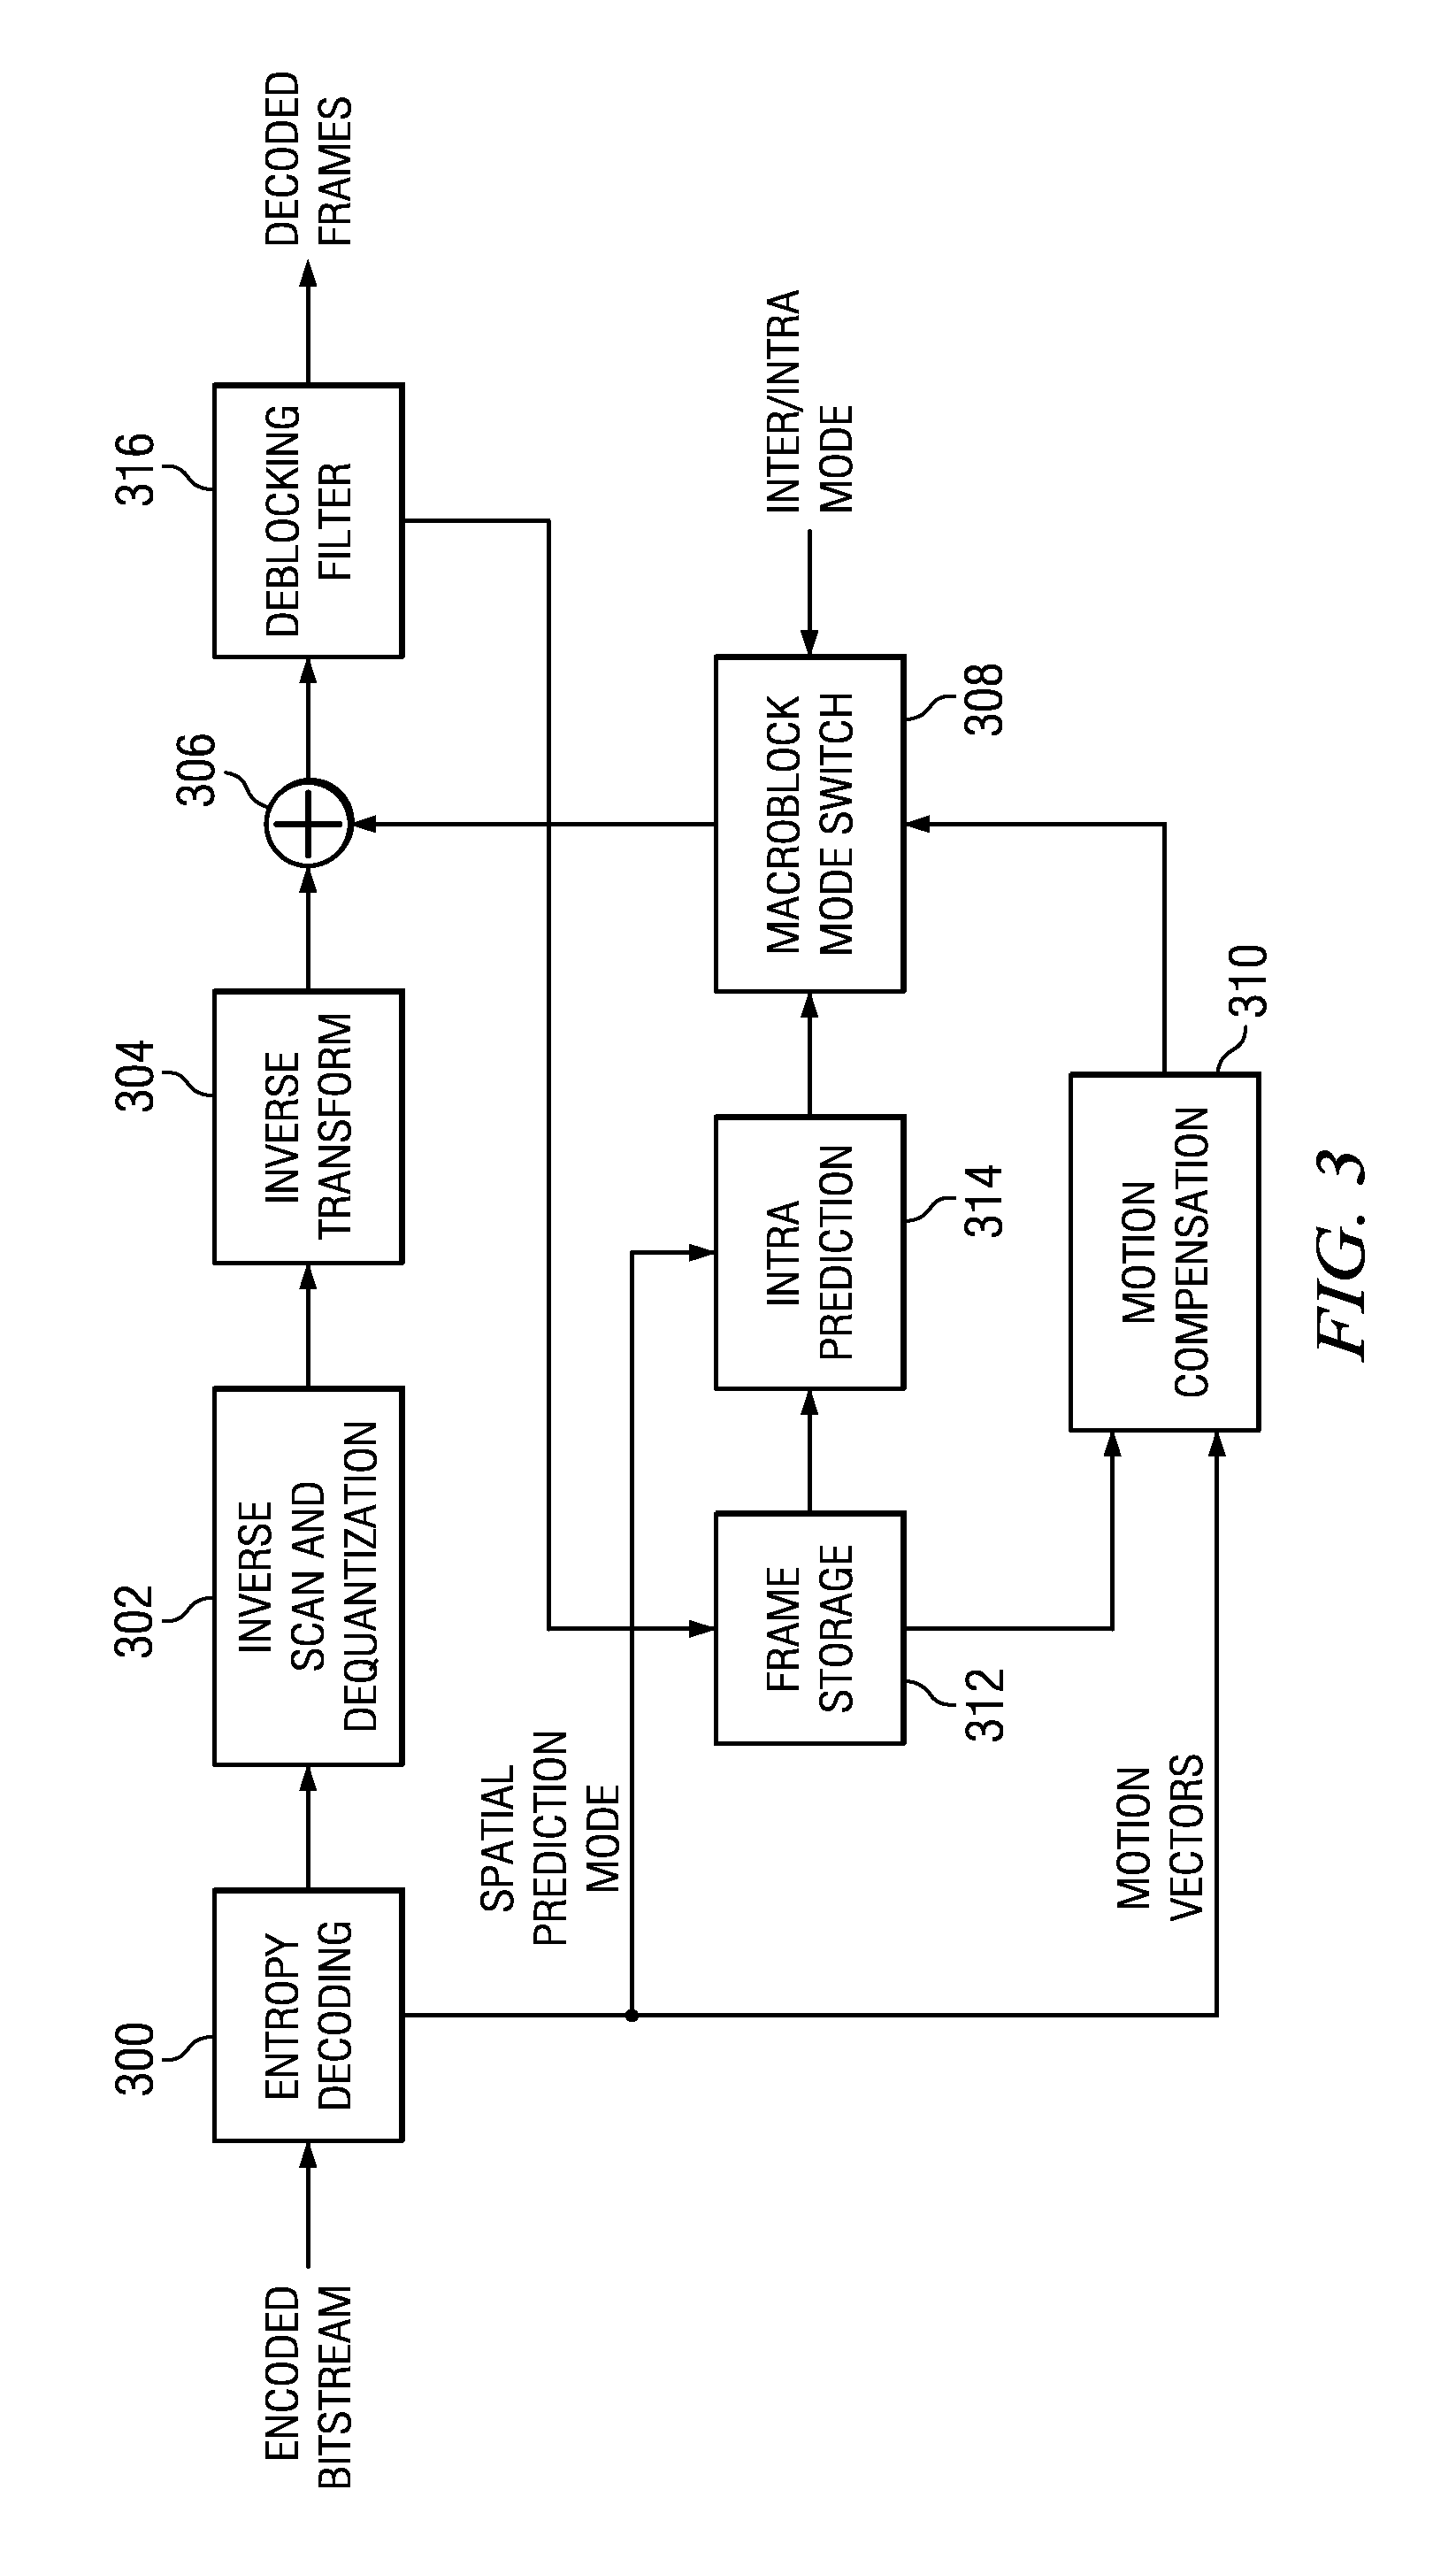 Parallel CABAC Decoding for Video Decompression